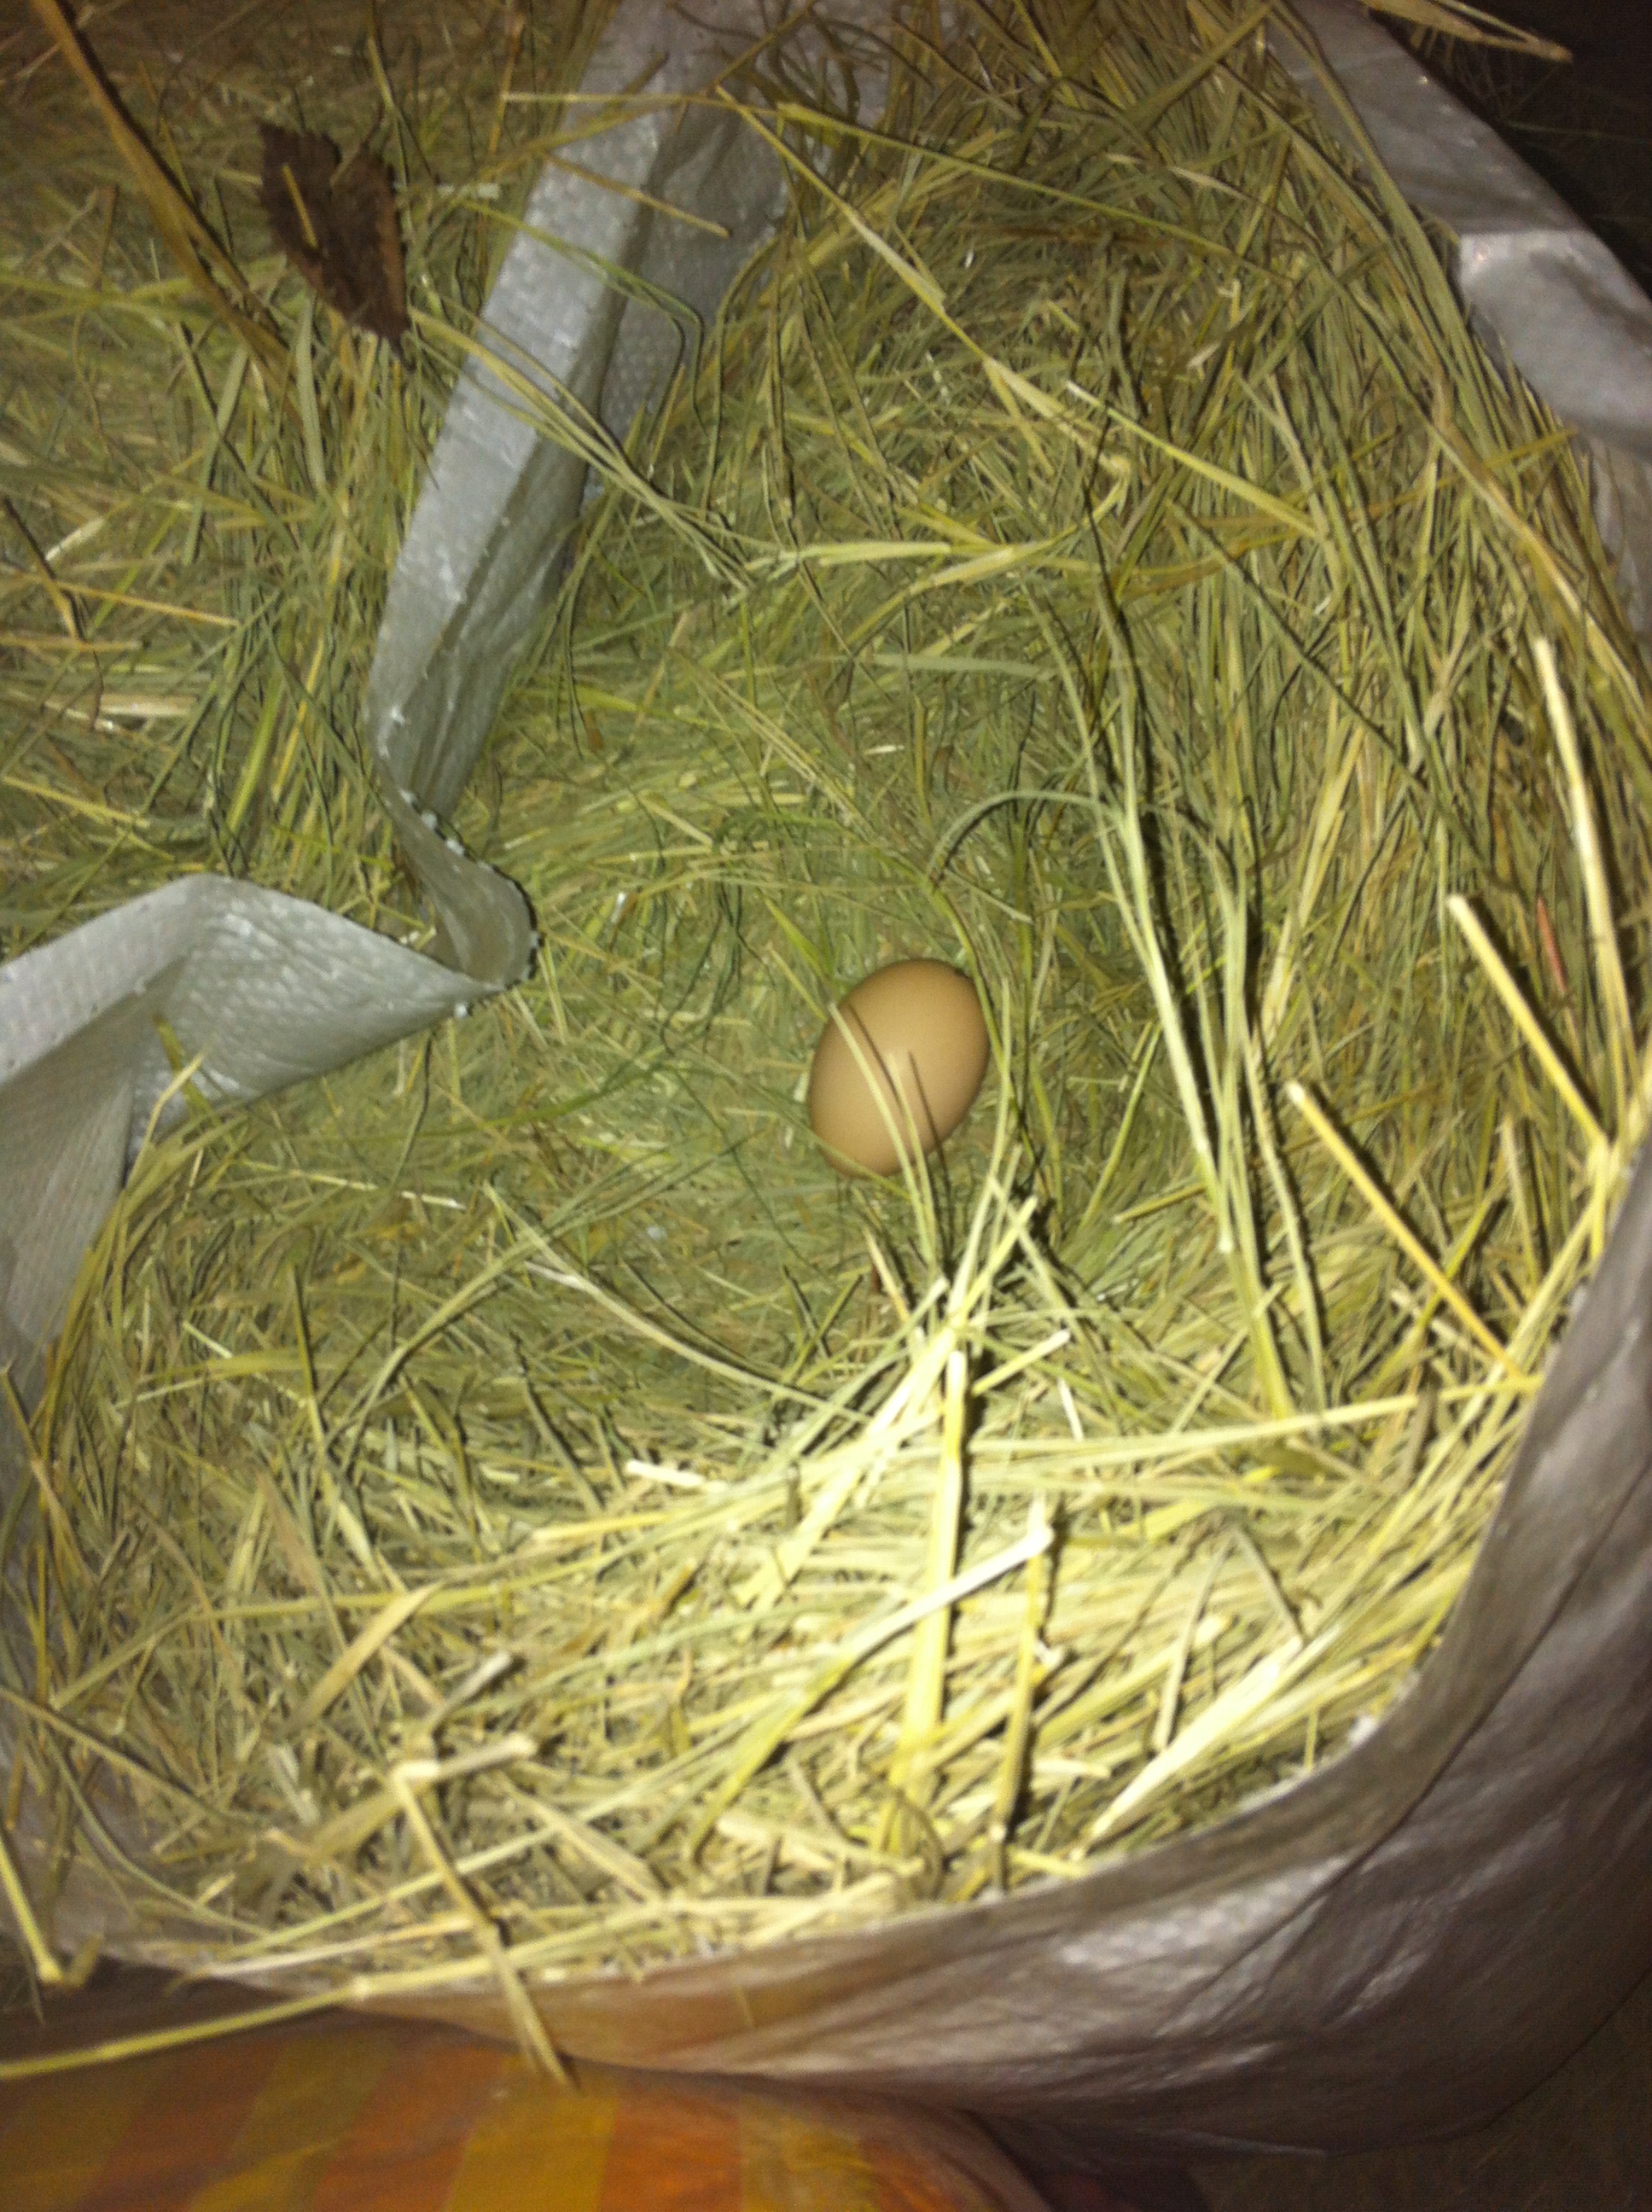 Chickens will lay almost anywhere. This egg was laid in a feed sack that was storing hay.